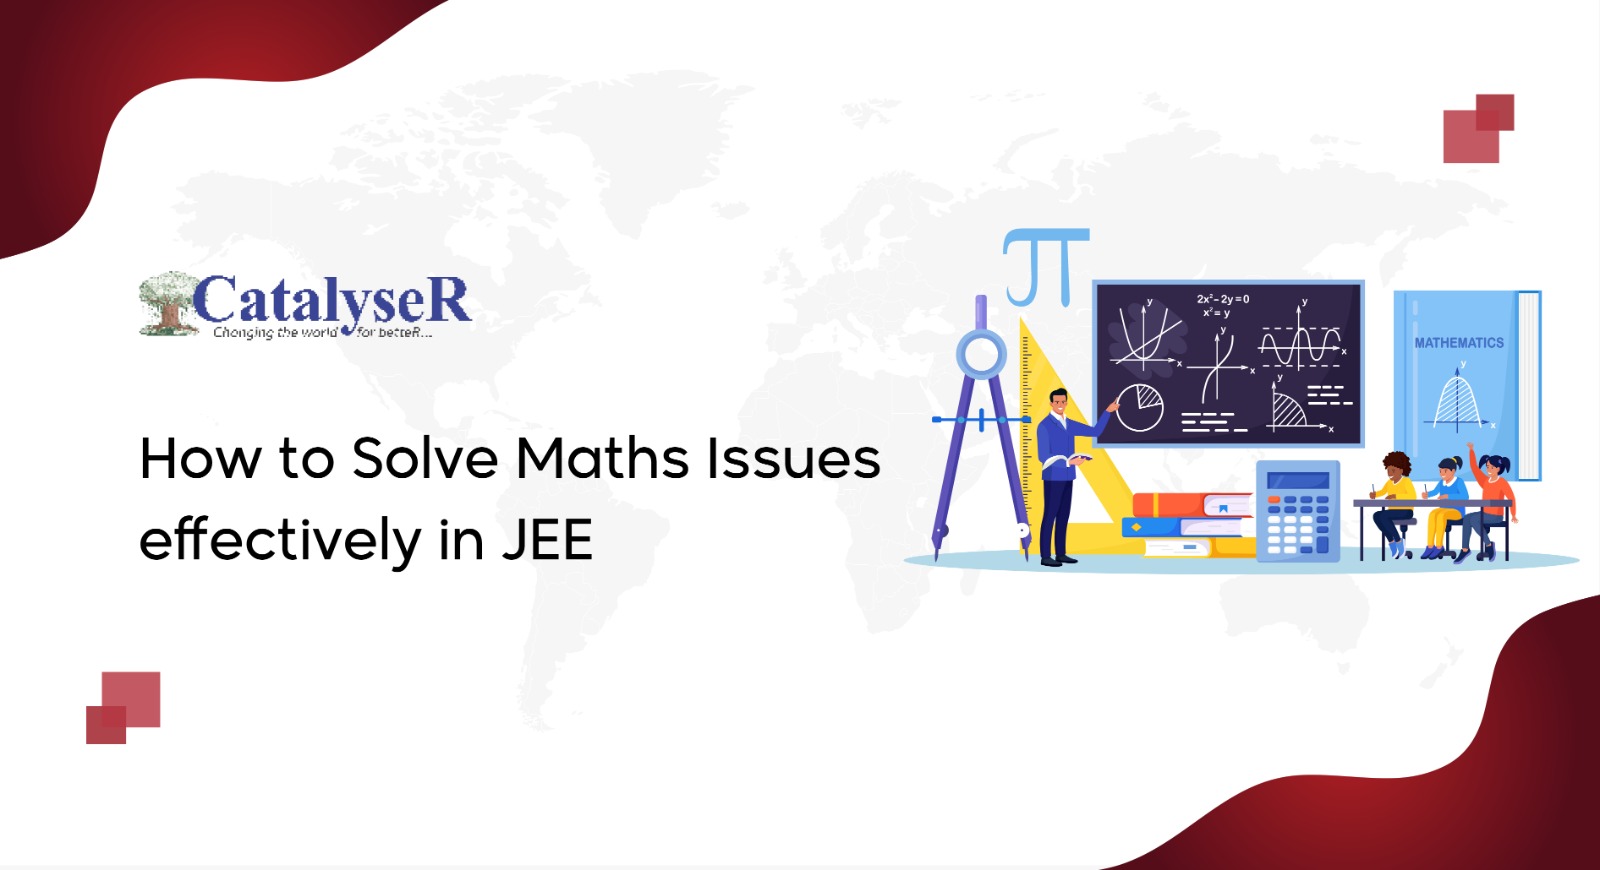 How to Solve Maths Issues effectively in JEE